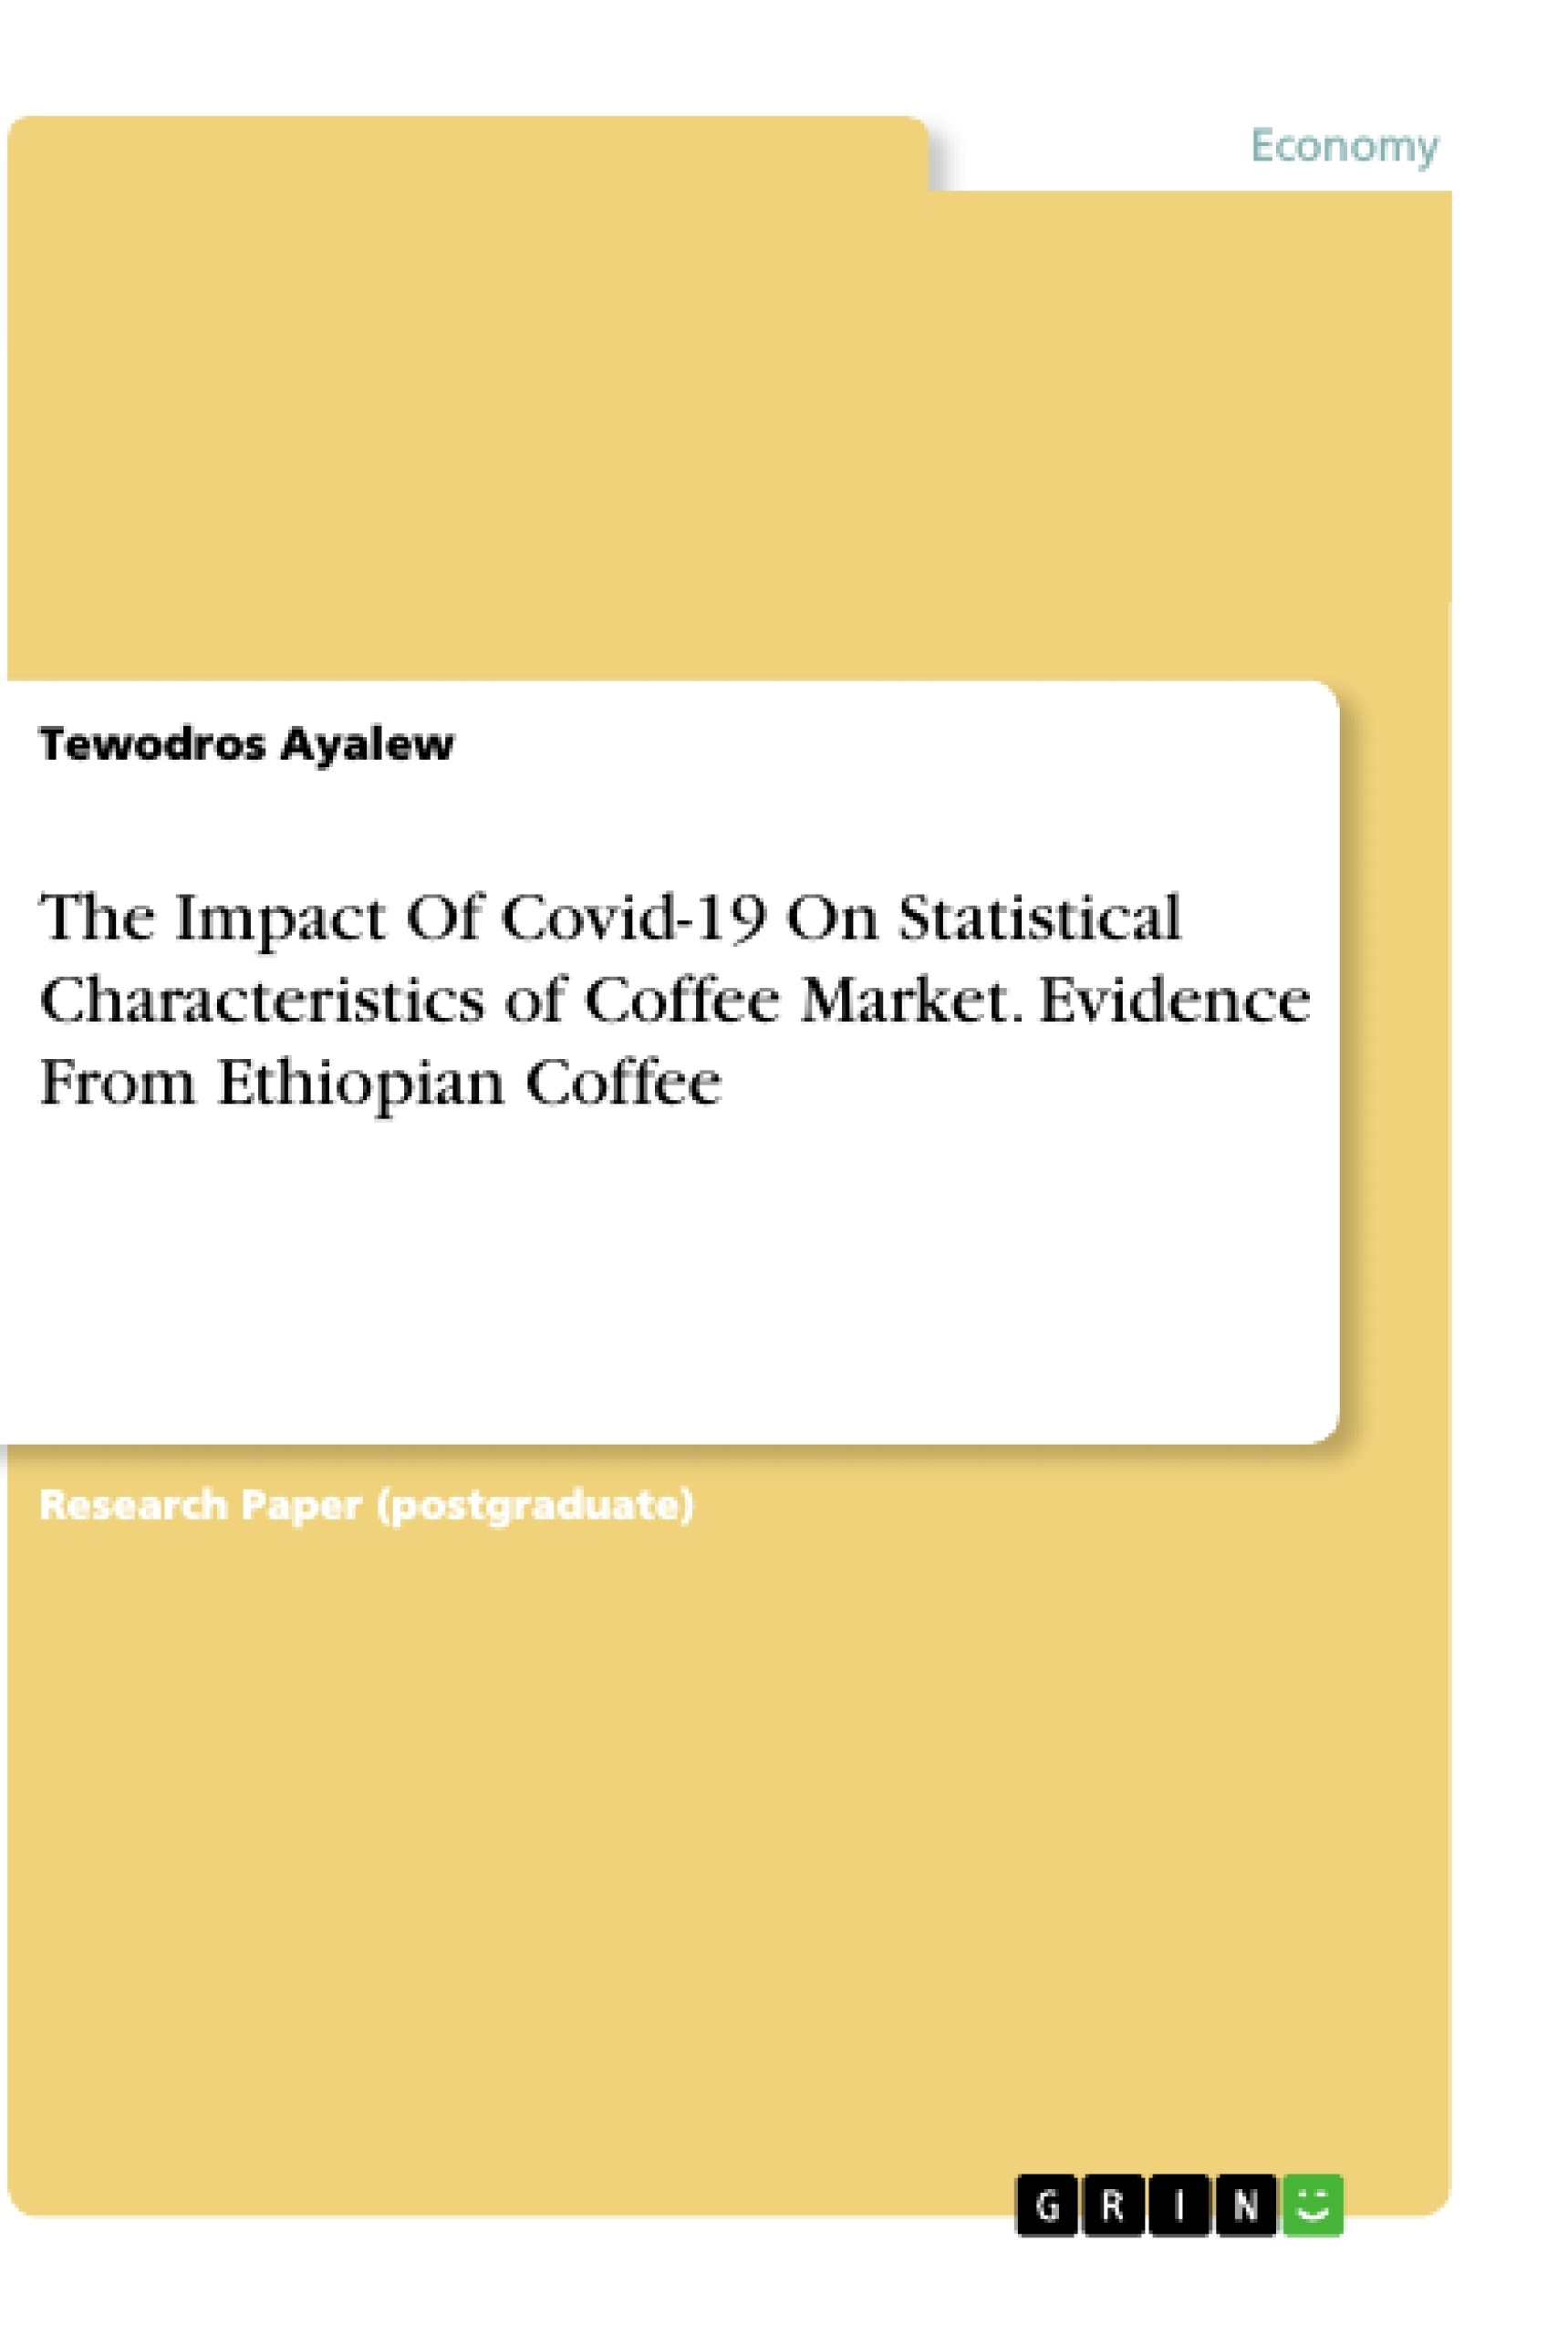 Title: The Impact Of Covid-19 On Statistical Characteristics of Coffee Market. Evidence From Ethiopian Coffee